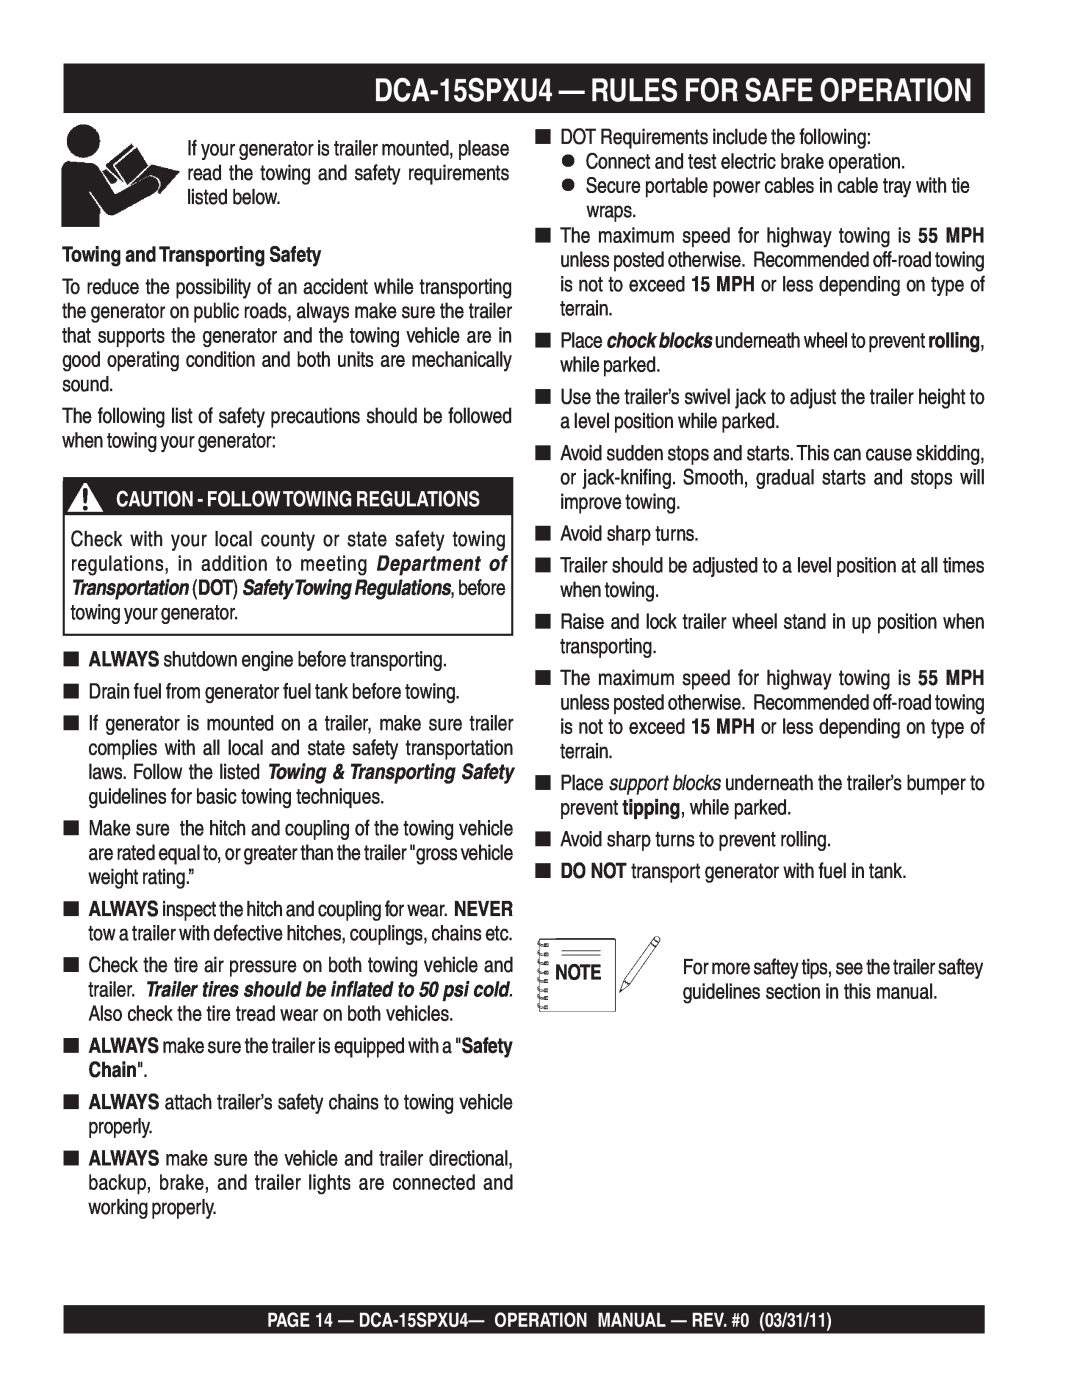 Multiquip operation manual Towing and Transporting Safety, DCA-15SPXU4- RULES FOR SAFE OPERATION 